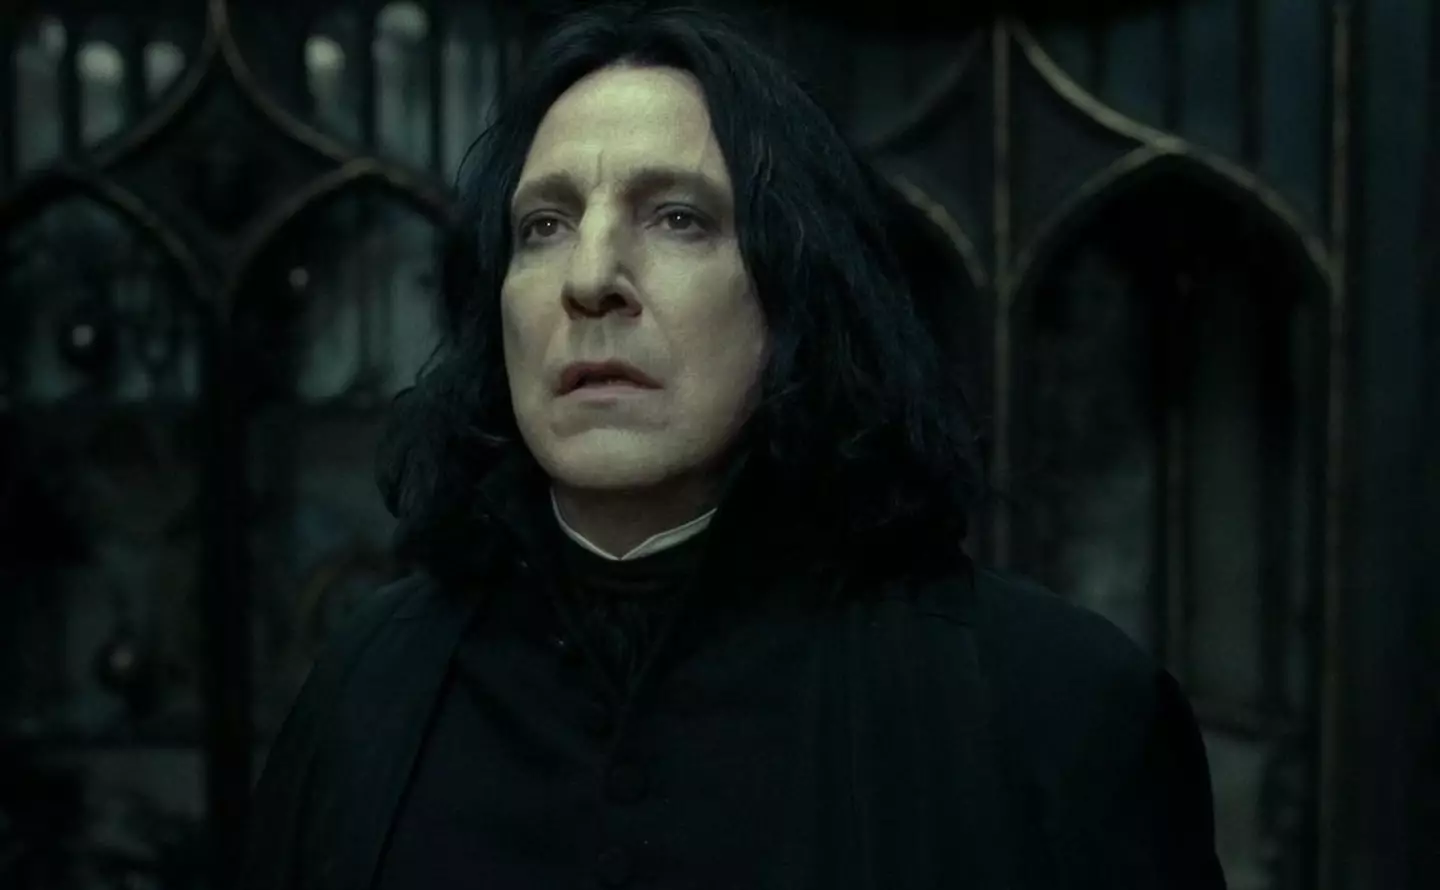 Snape's character was so much more than what he presented on the surface in both the books and films.